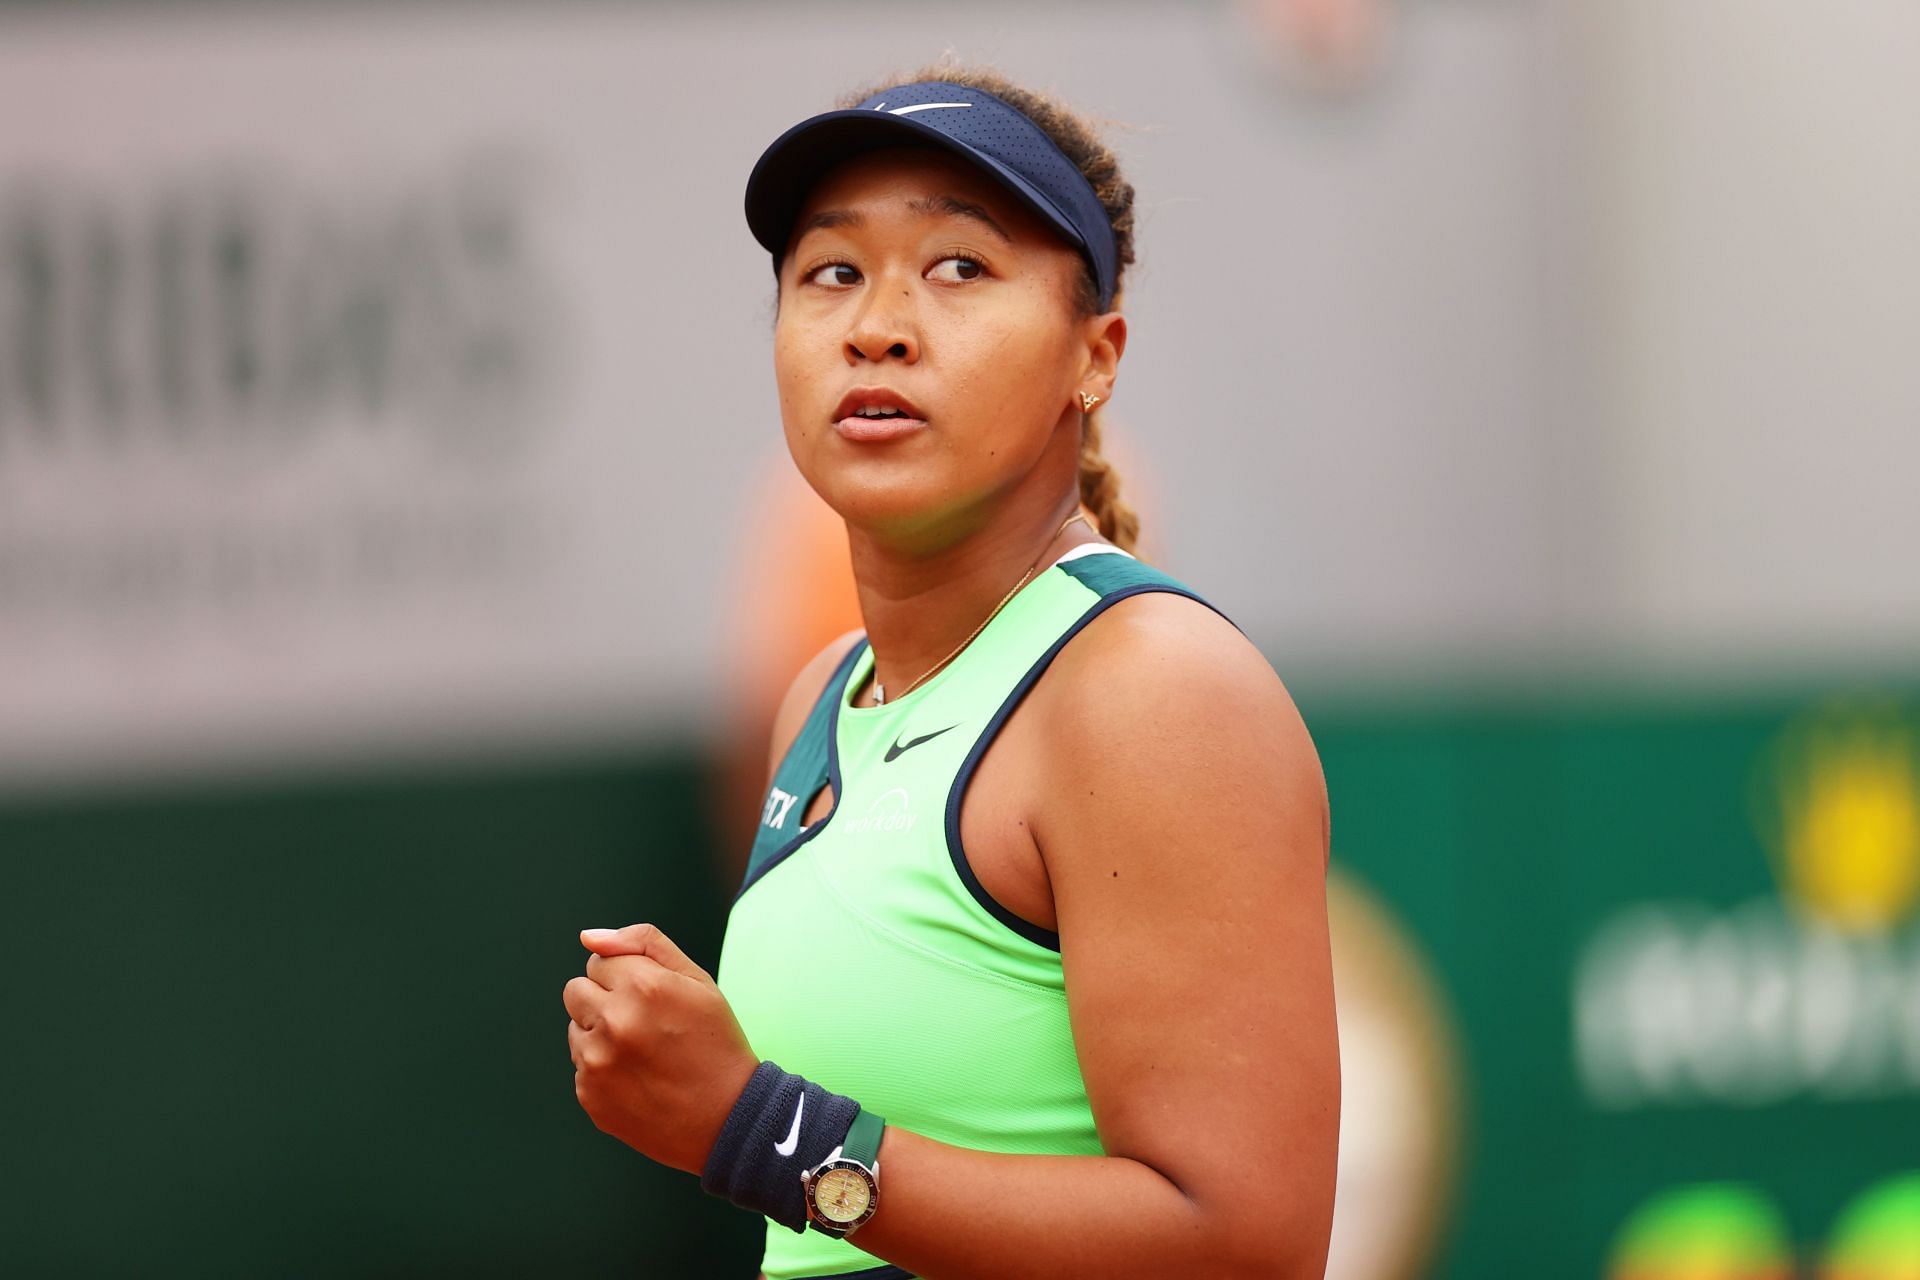 Naomi Osaka will be hoping to be back in action before the US Open at the very least